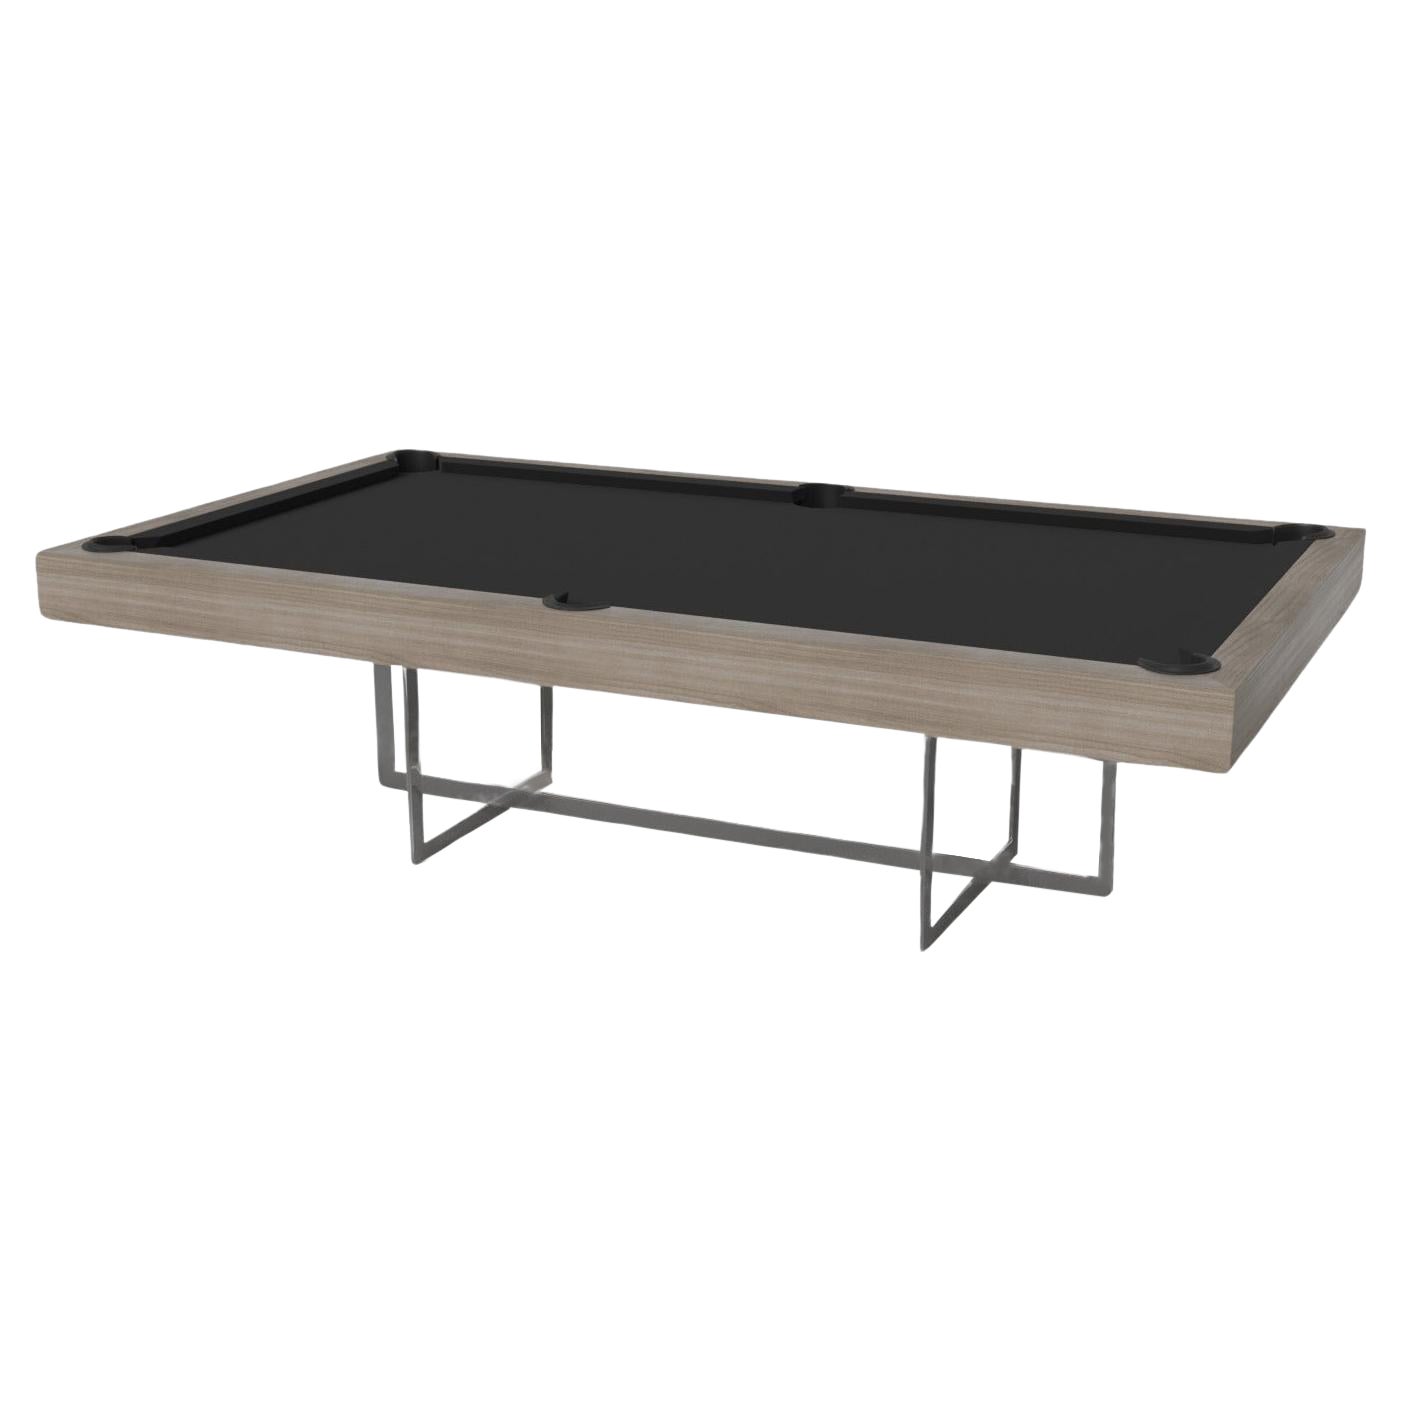 Elevate Customs Beso Pool Table / Solid White Oak Wood in 9' - Made in USA